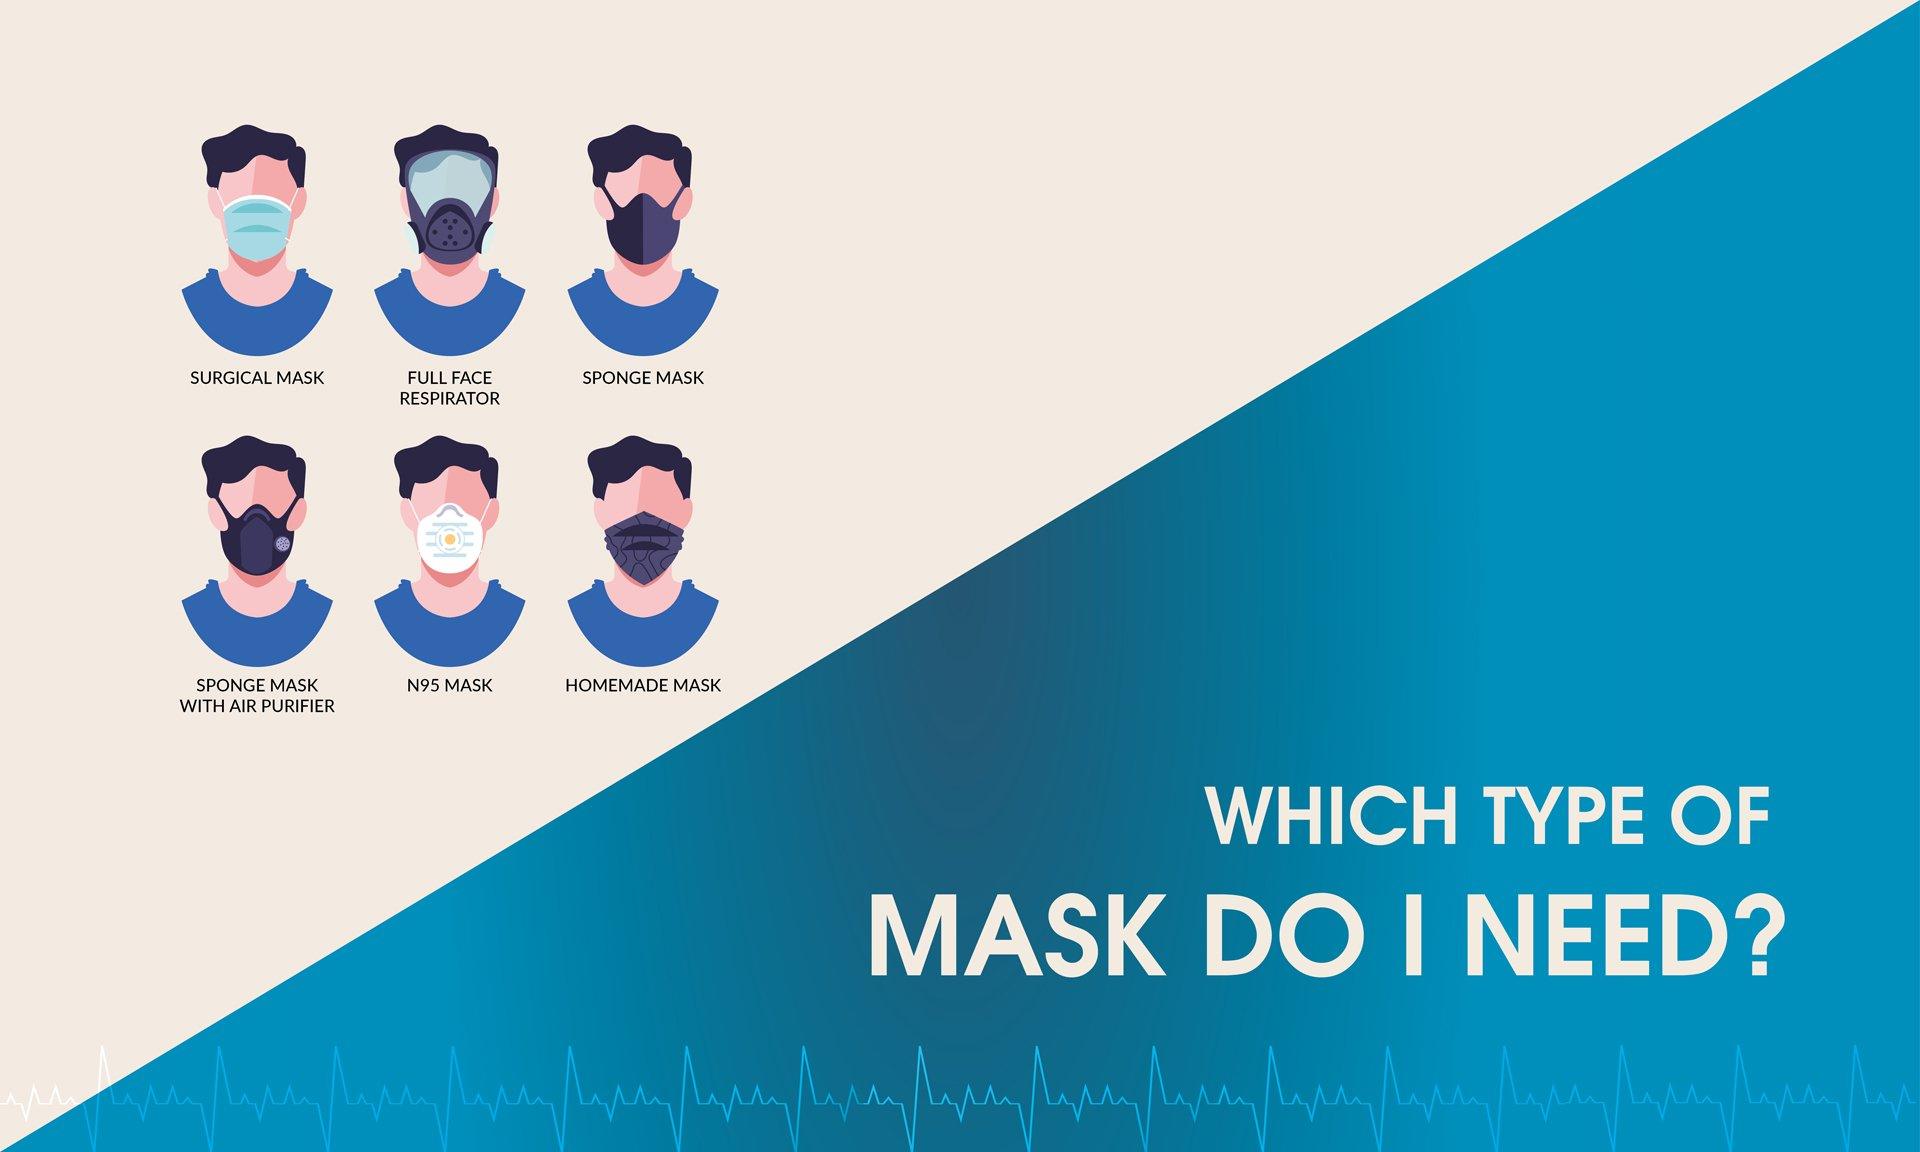 Which type of mask do I need?